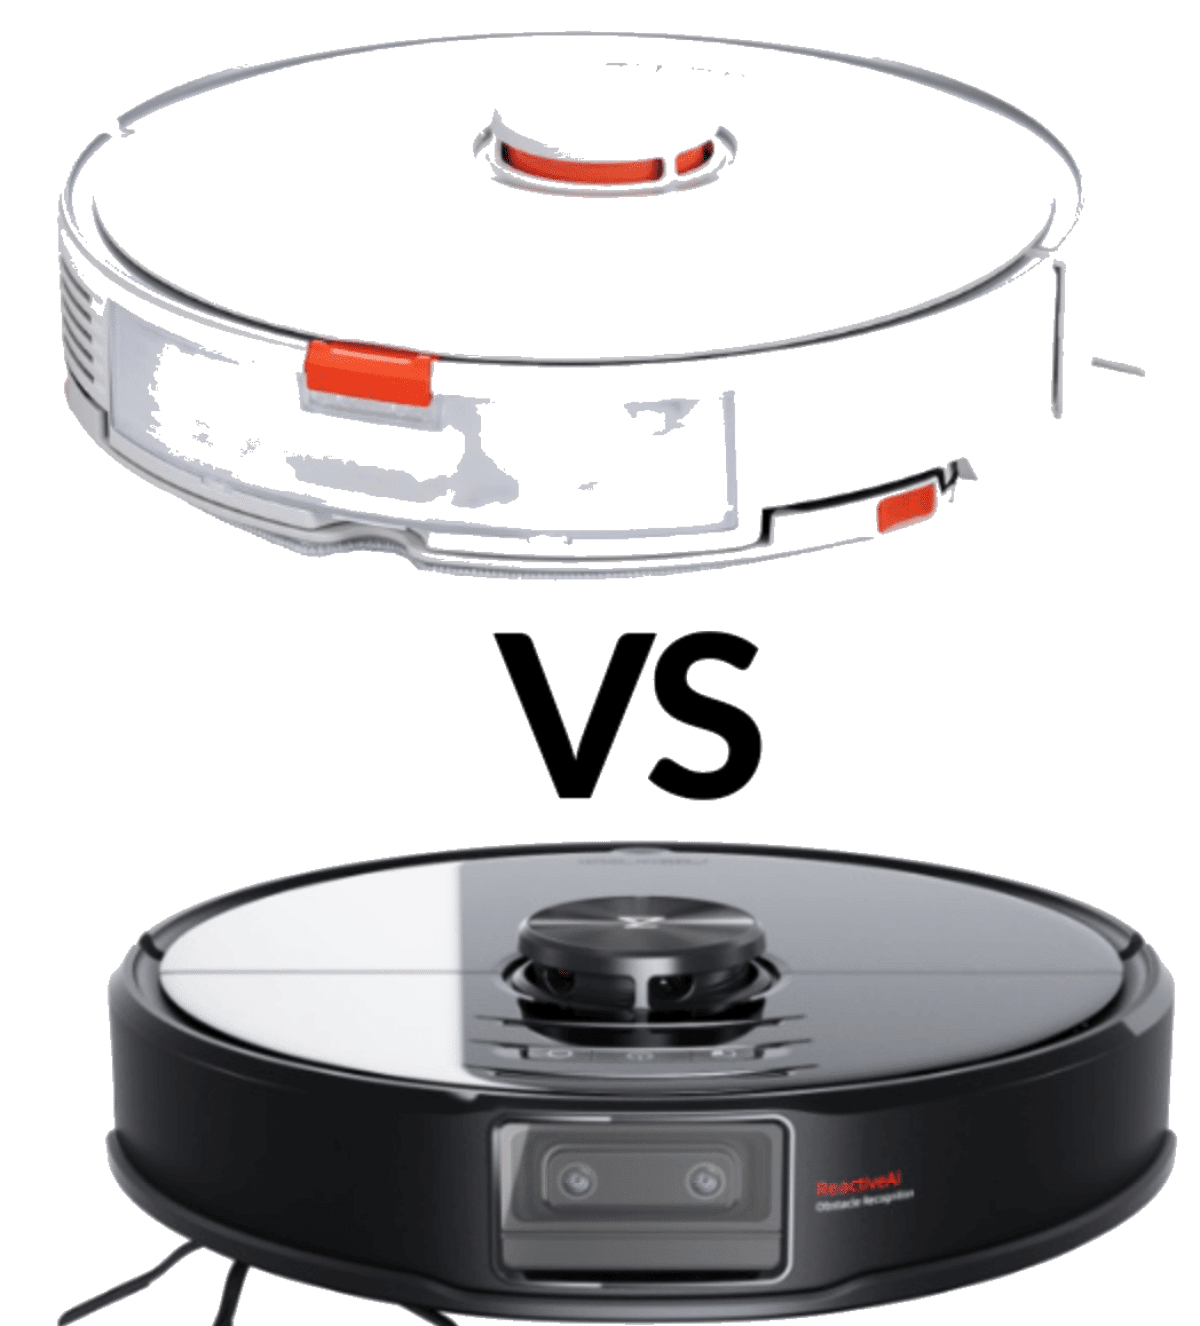 Roborock S6 vs S7: What is the difference?